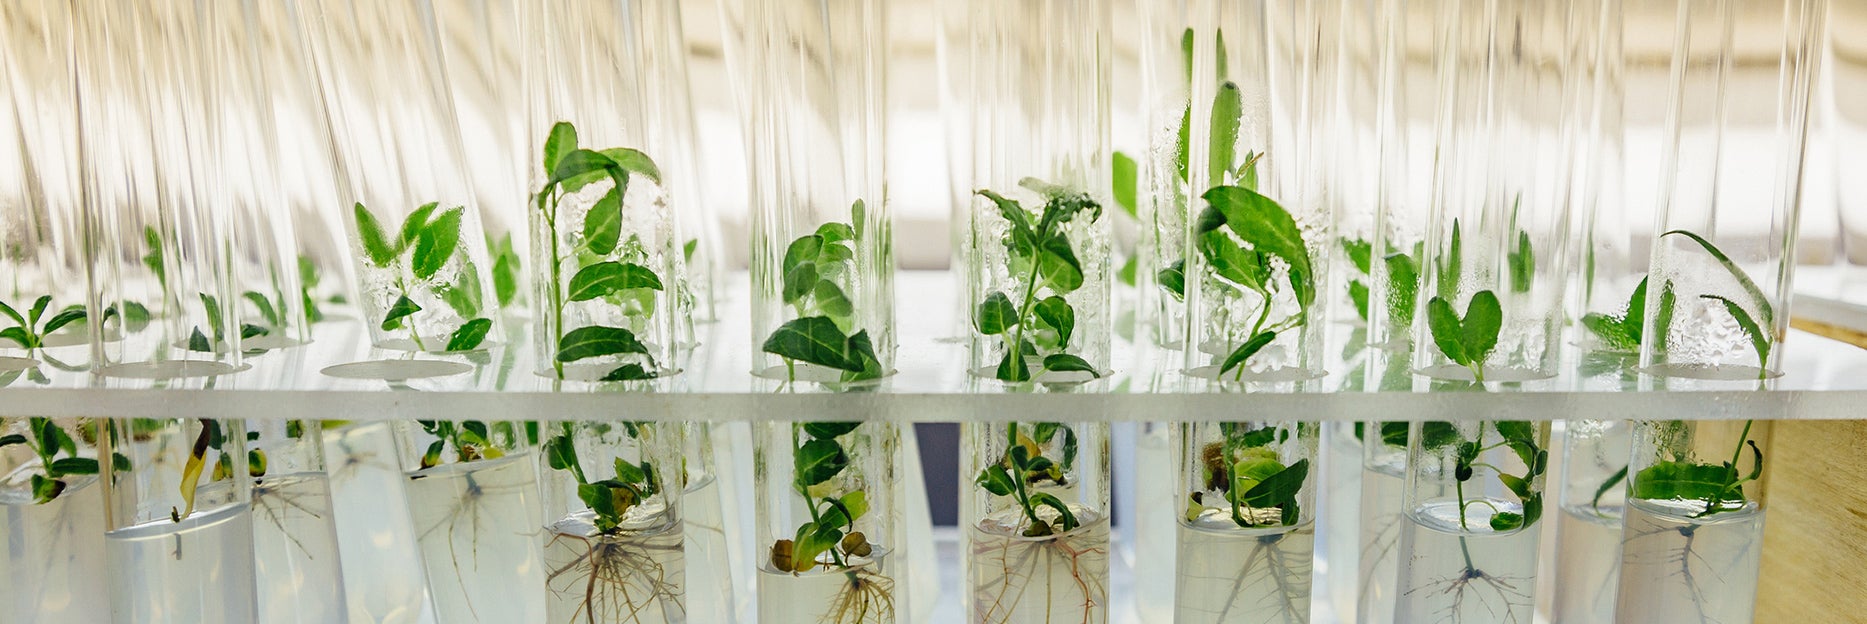 plant samples in test tubes (c) iStock